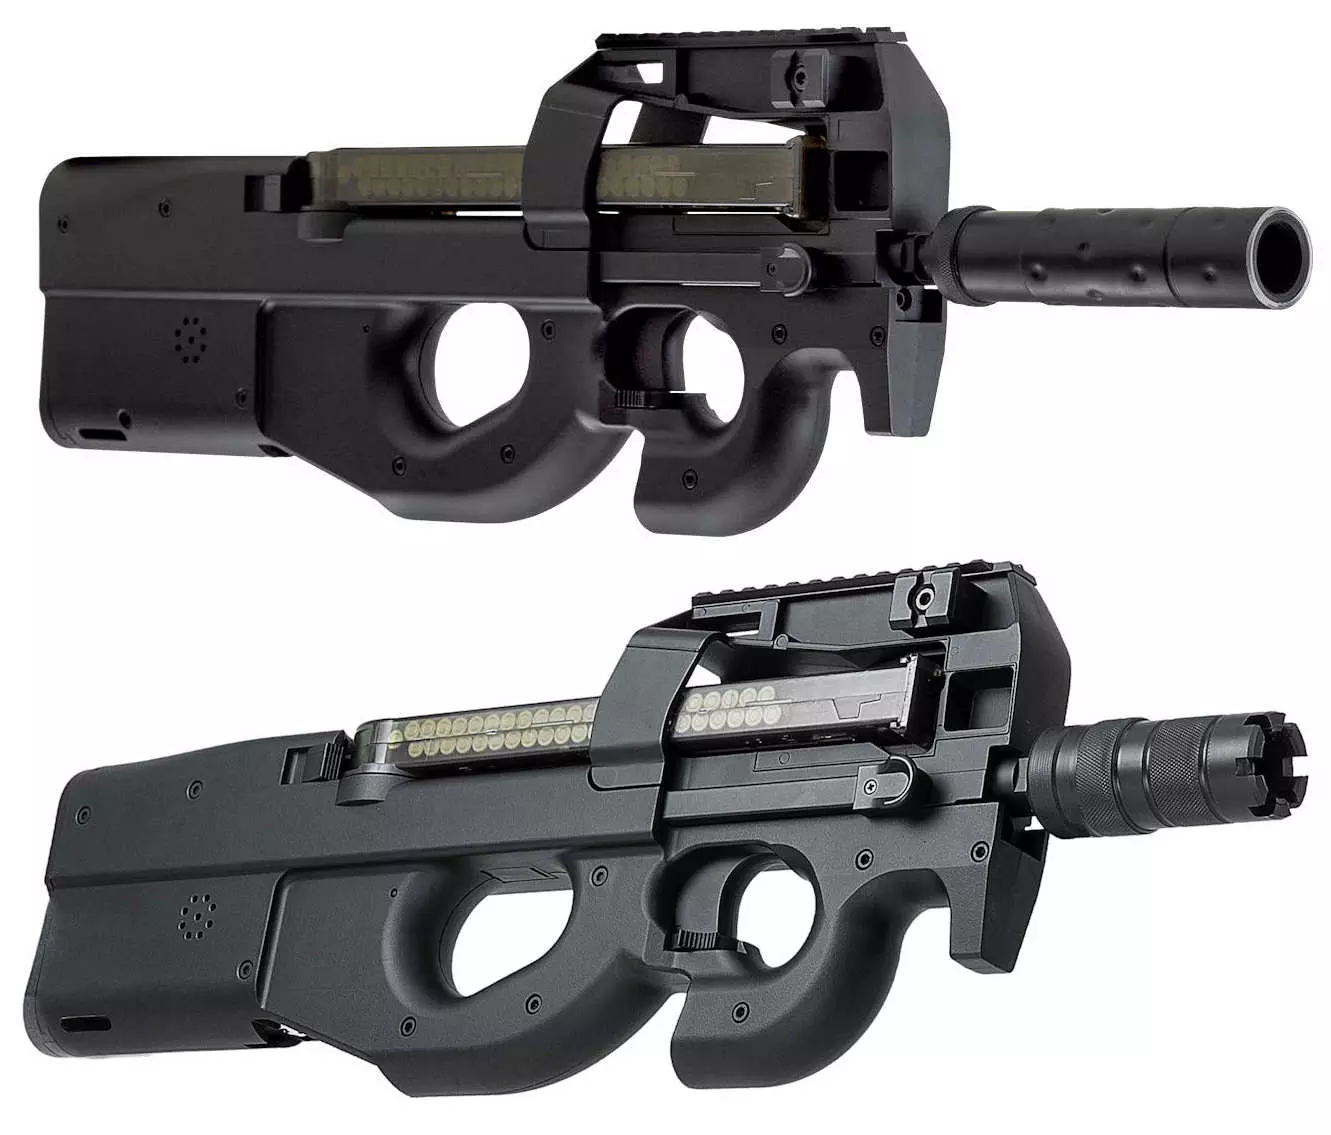 P 90 laser tag SMG front 2 types optics